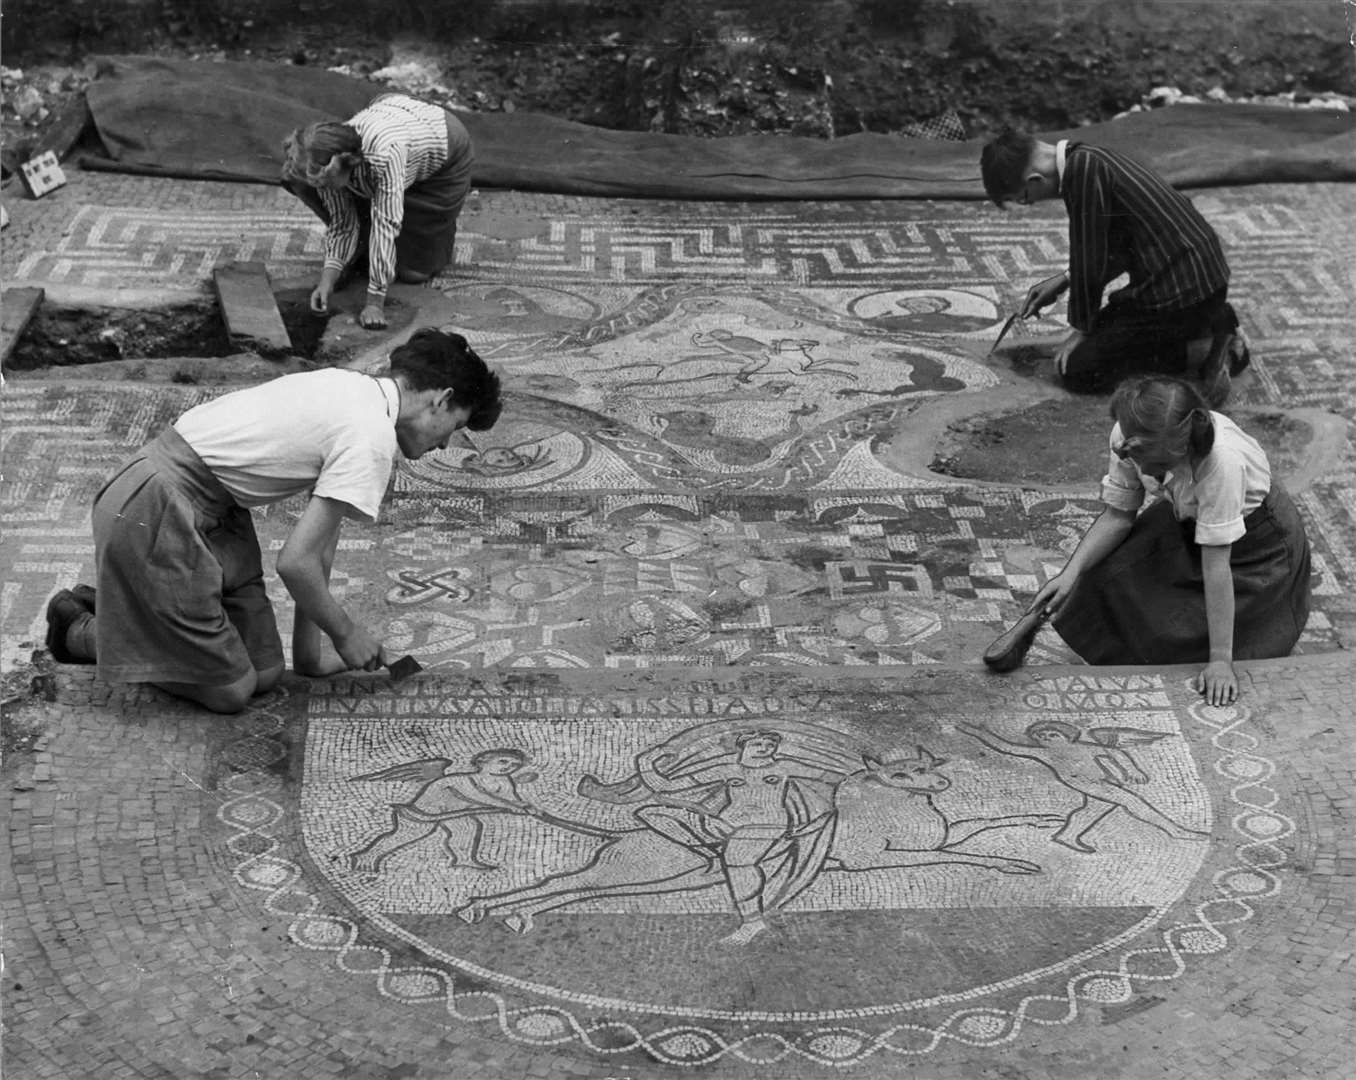 A photo from 1950 shows work being undertaking on the mosaic of the floor of a Roman villa dining room in Lullingstone